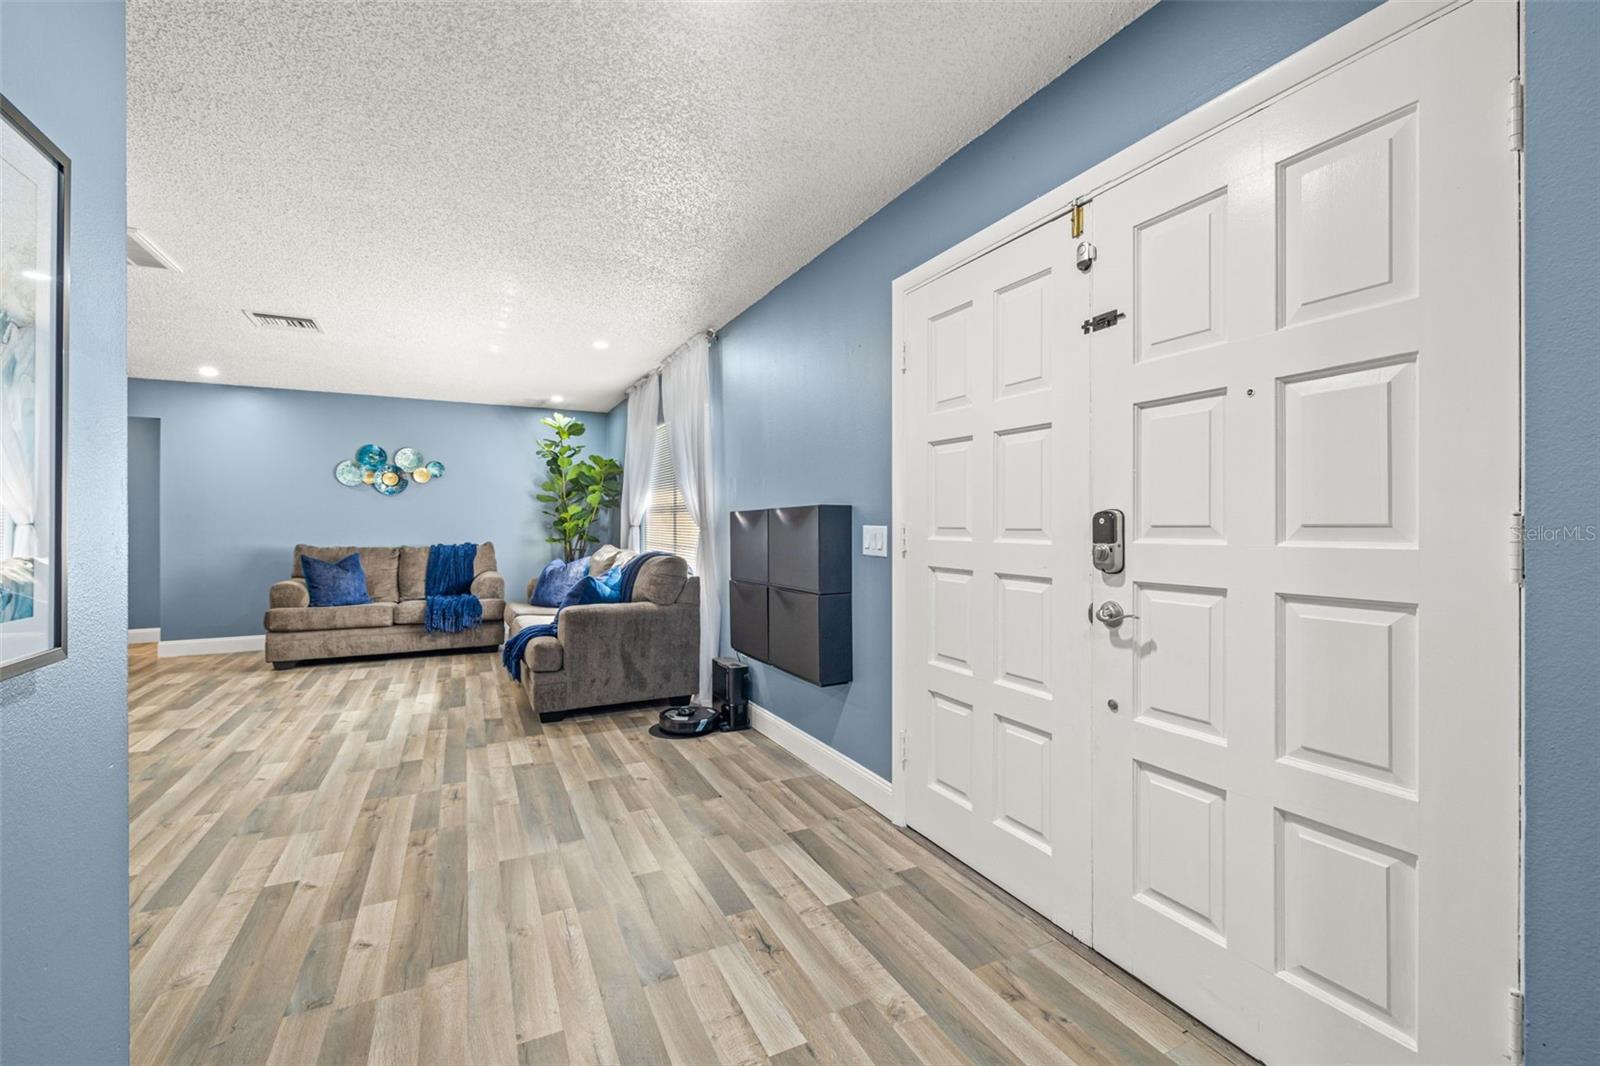 As you enter the home, you'll immediately notice the on-trend paint colors and bright open floor plan.